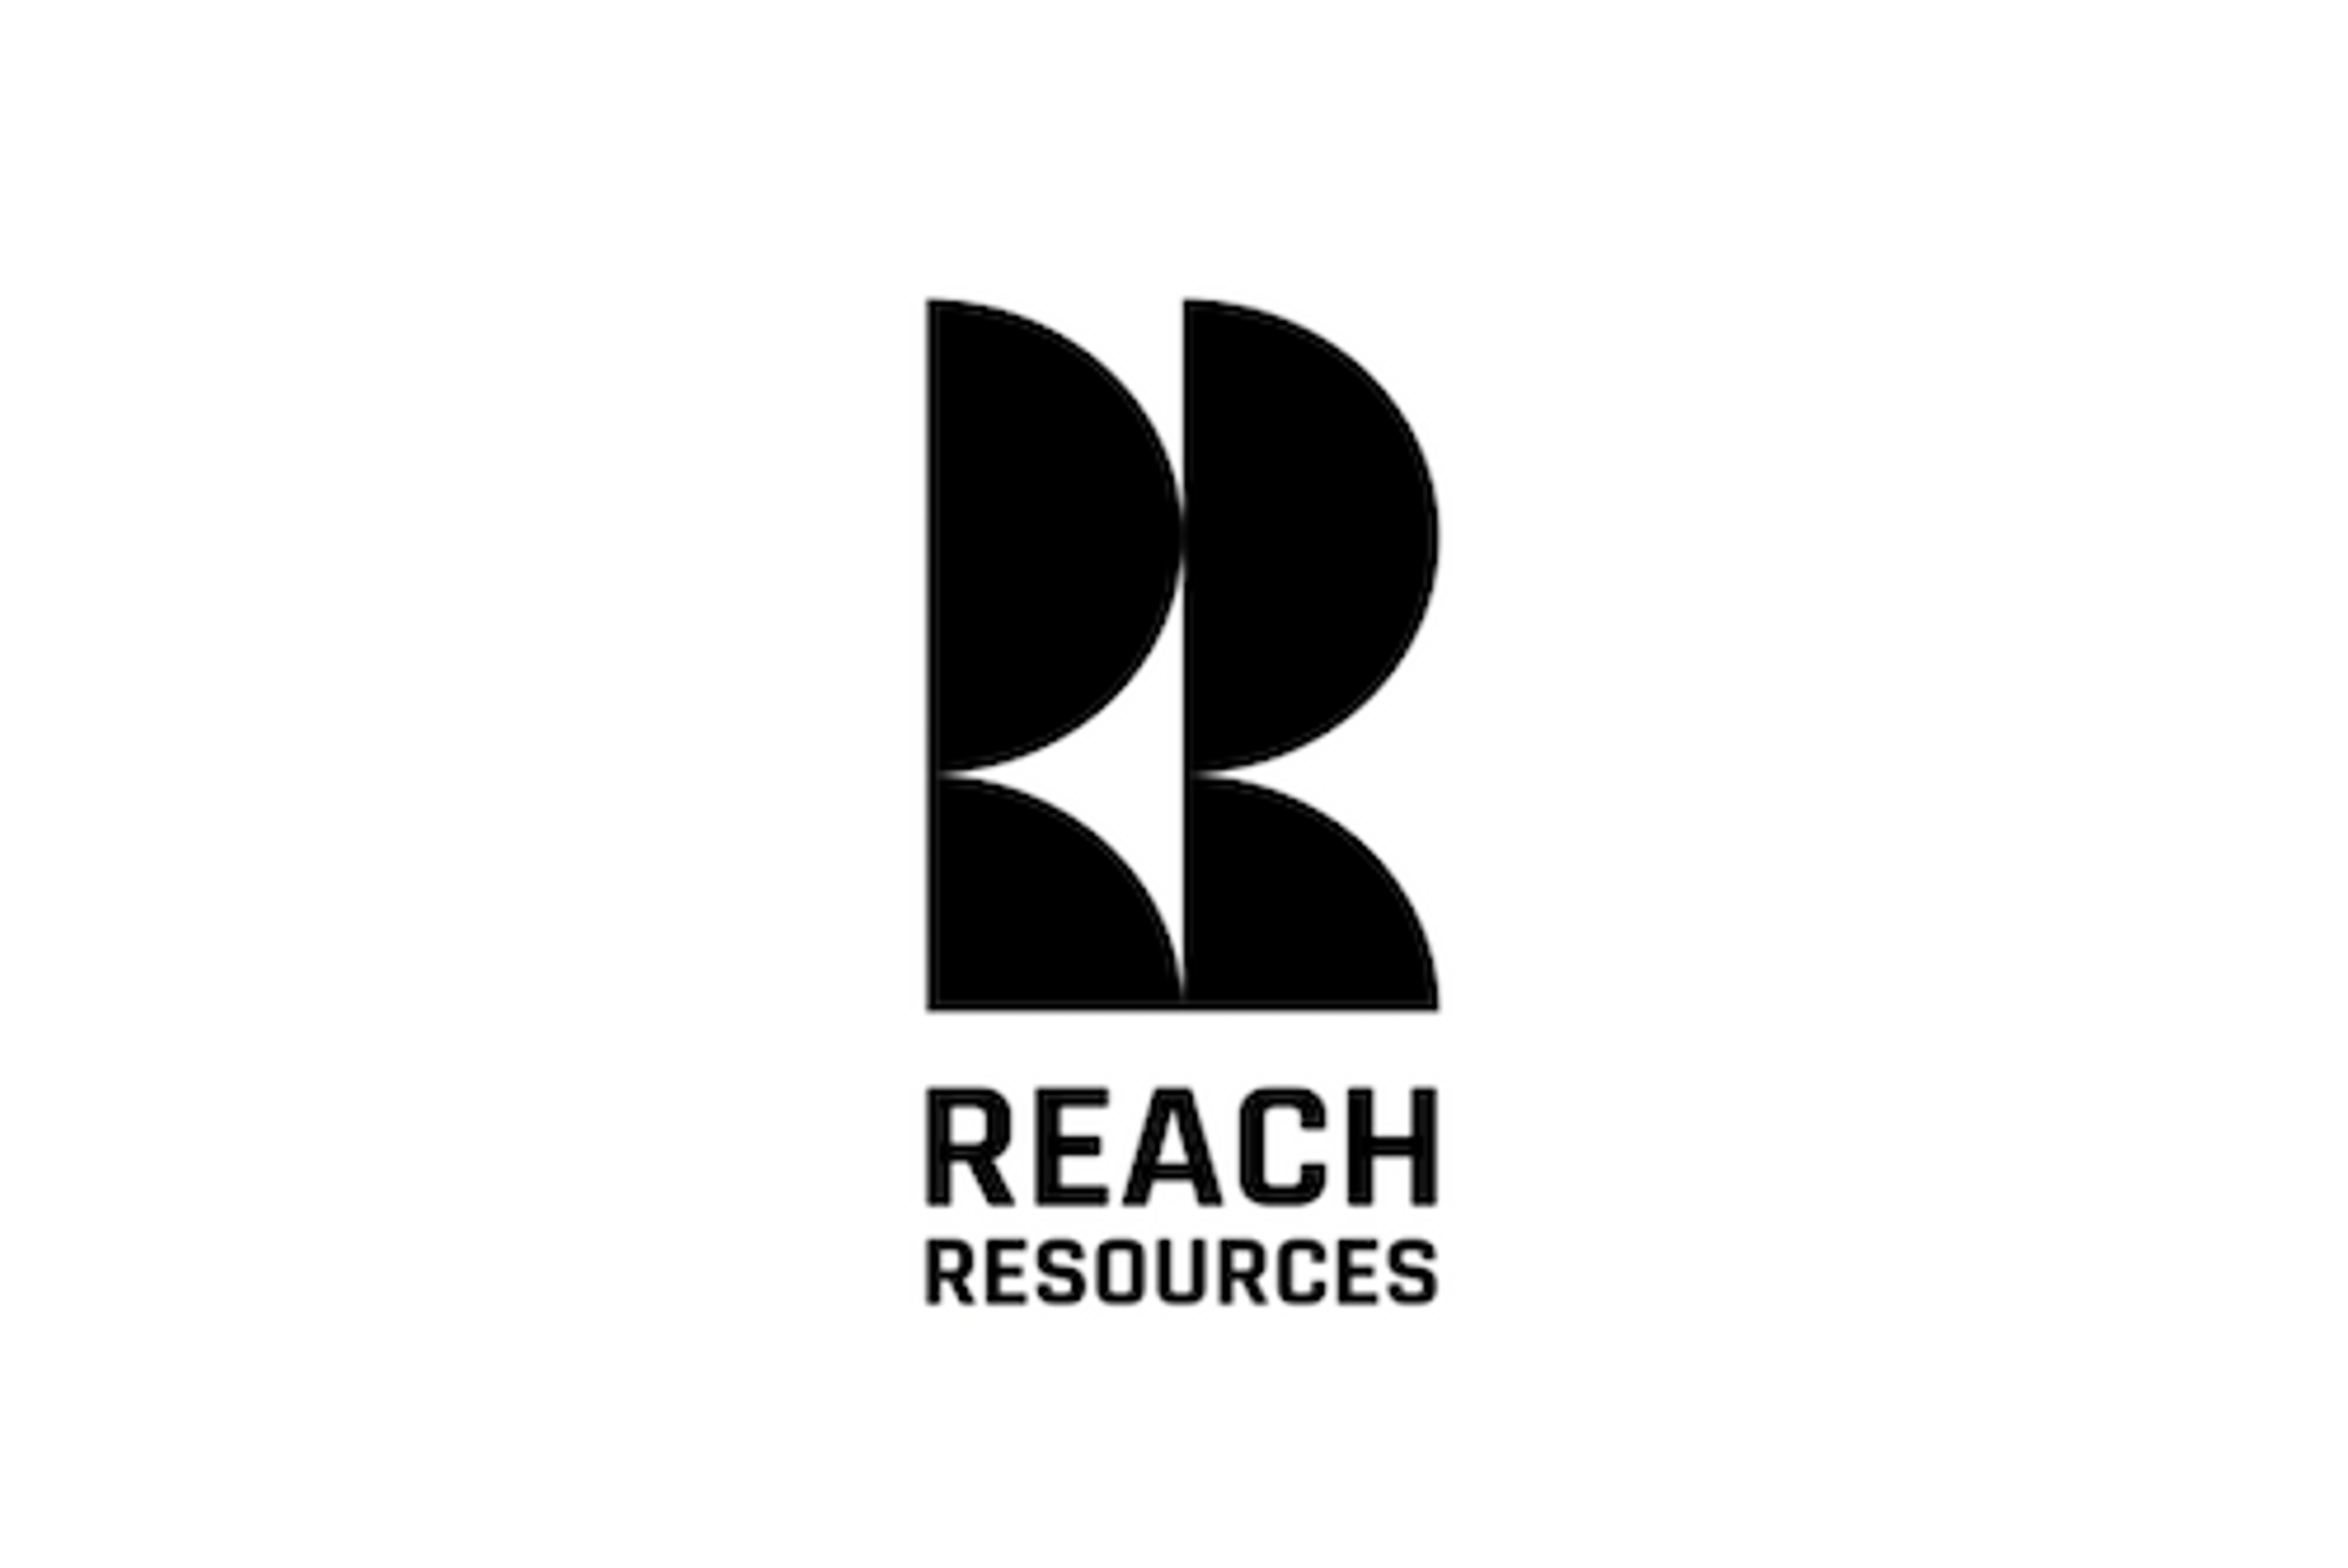 Reach Resources Makes Strategic Investment into Cutting-edge Rare Earth Element Recycling Business